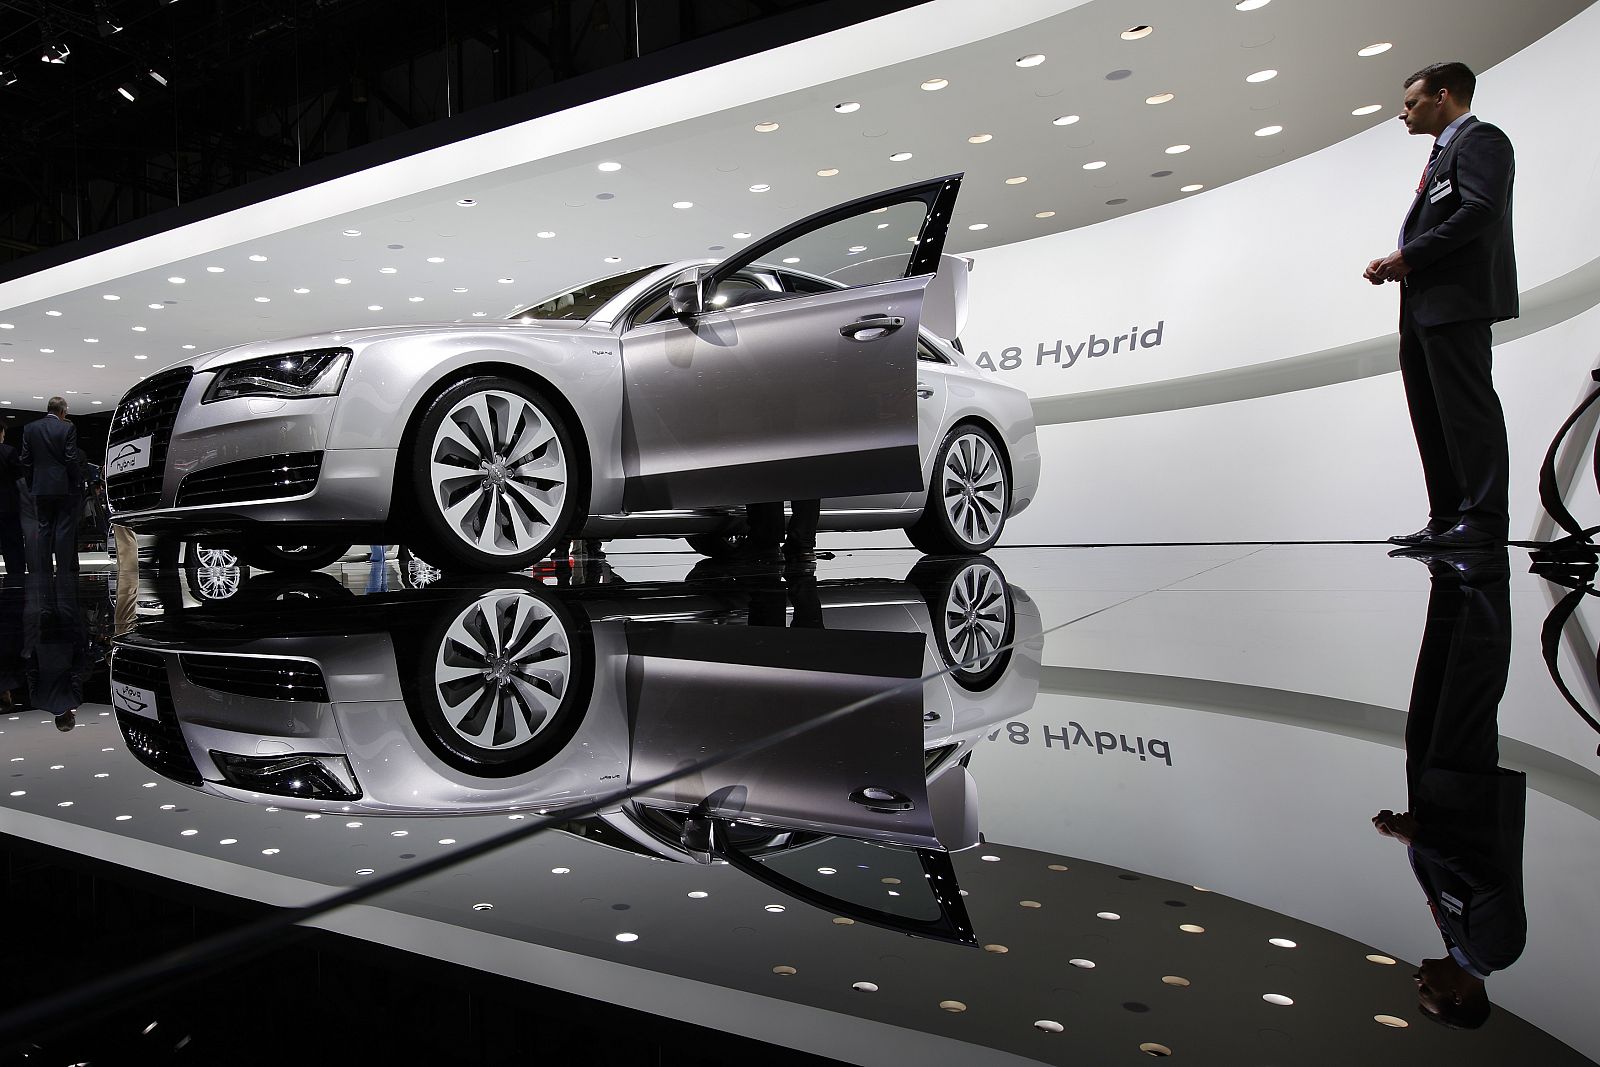 New Audi A8 hybrid design study is shown at exhibition stand of Audi during second media day of 80th Geneva Car Show in Geneva